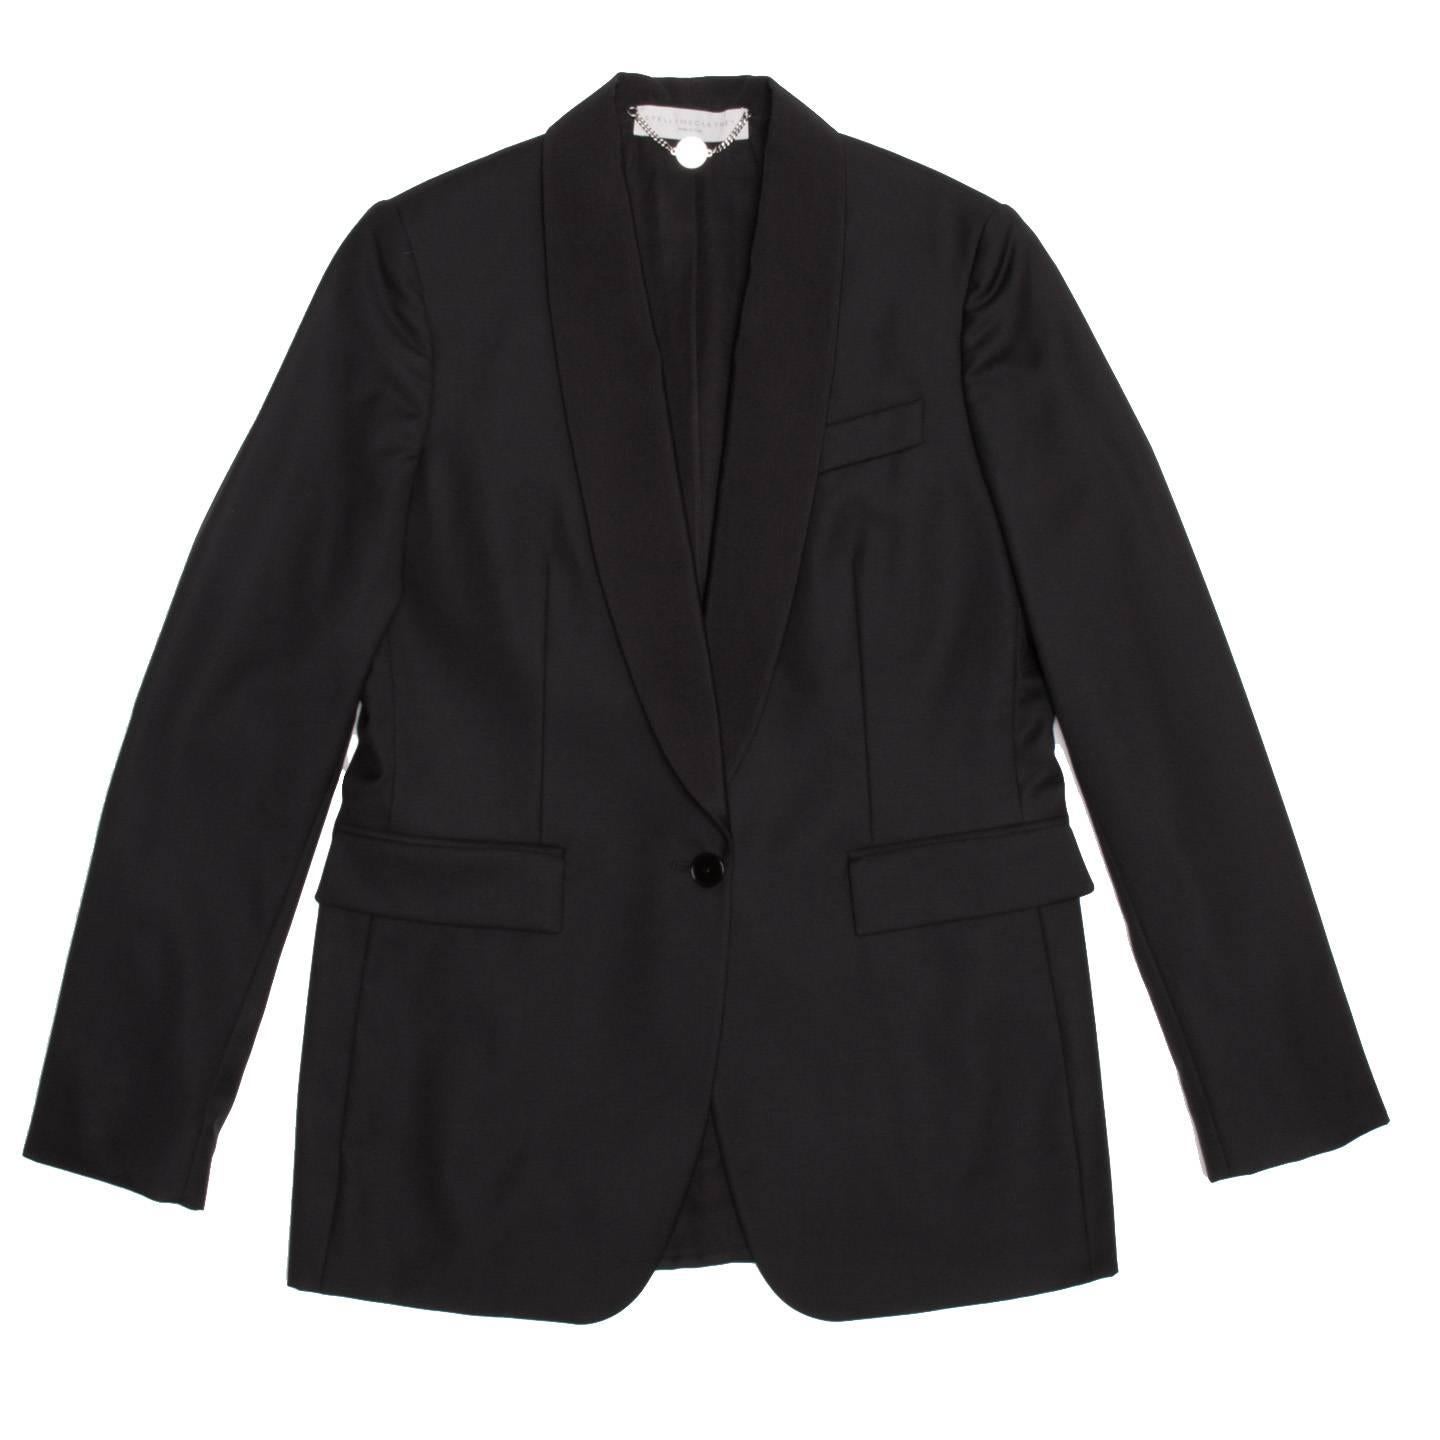 Stella McCartney Black Wool Tux Style Jacket In New Condition For Sale In Brooklyn, NY